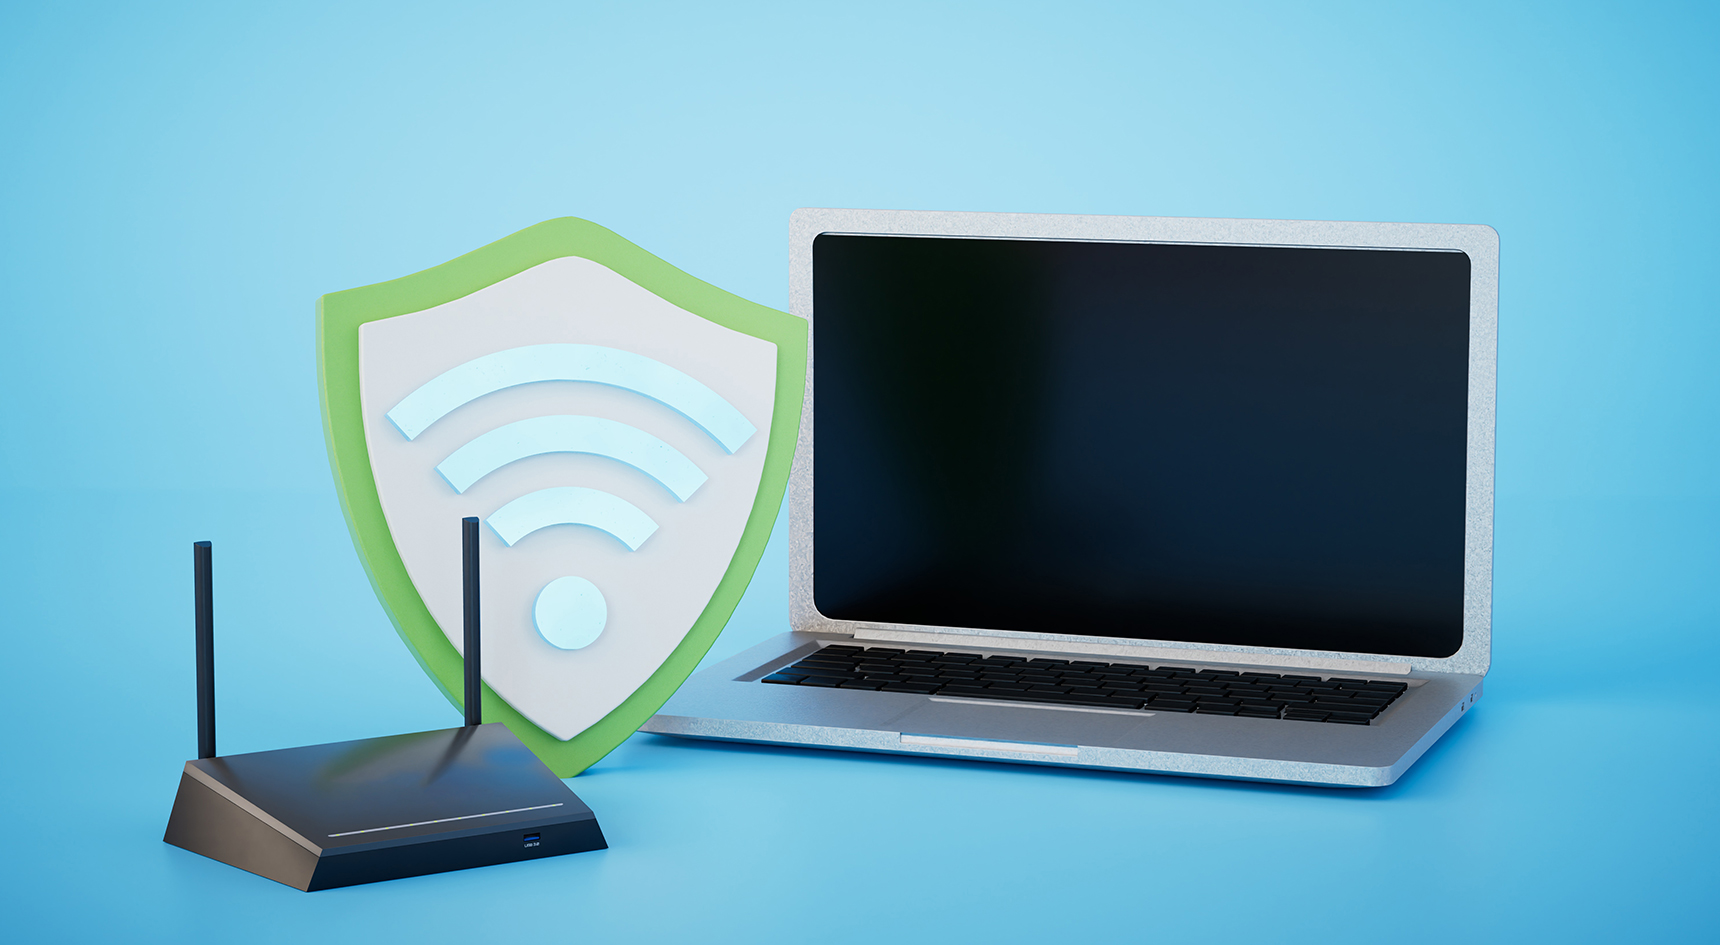 A router, a password protection icon and a laptop